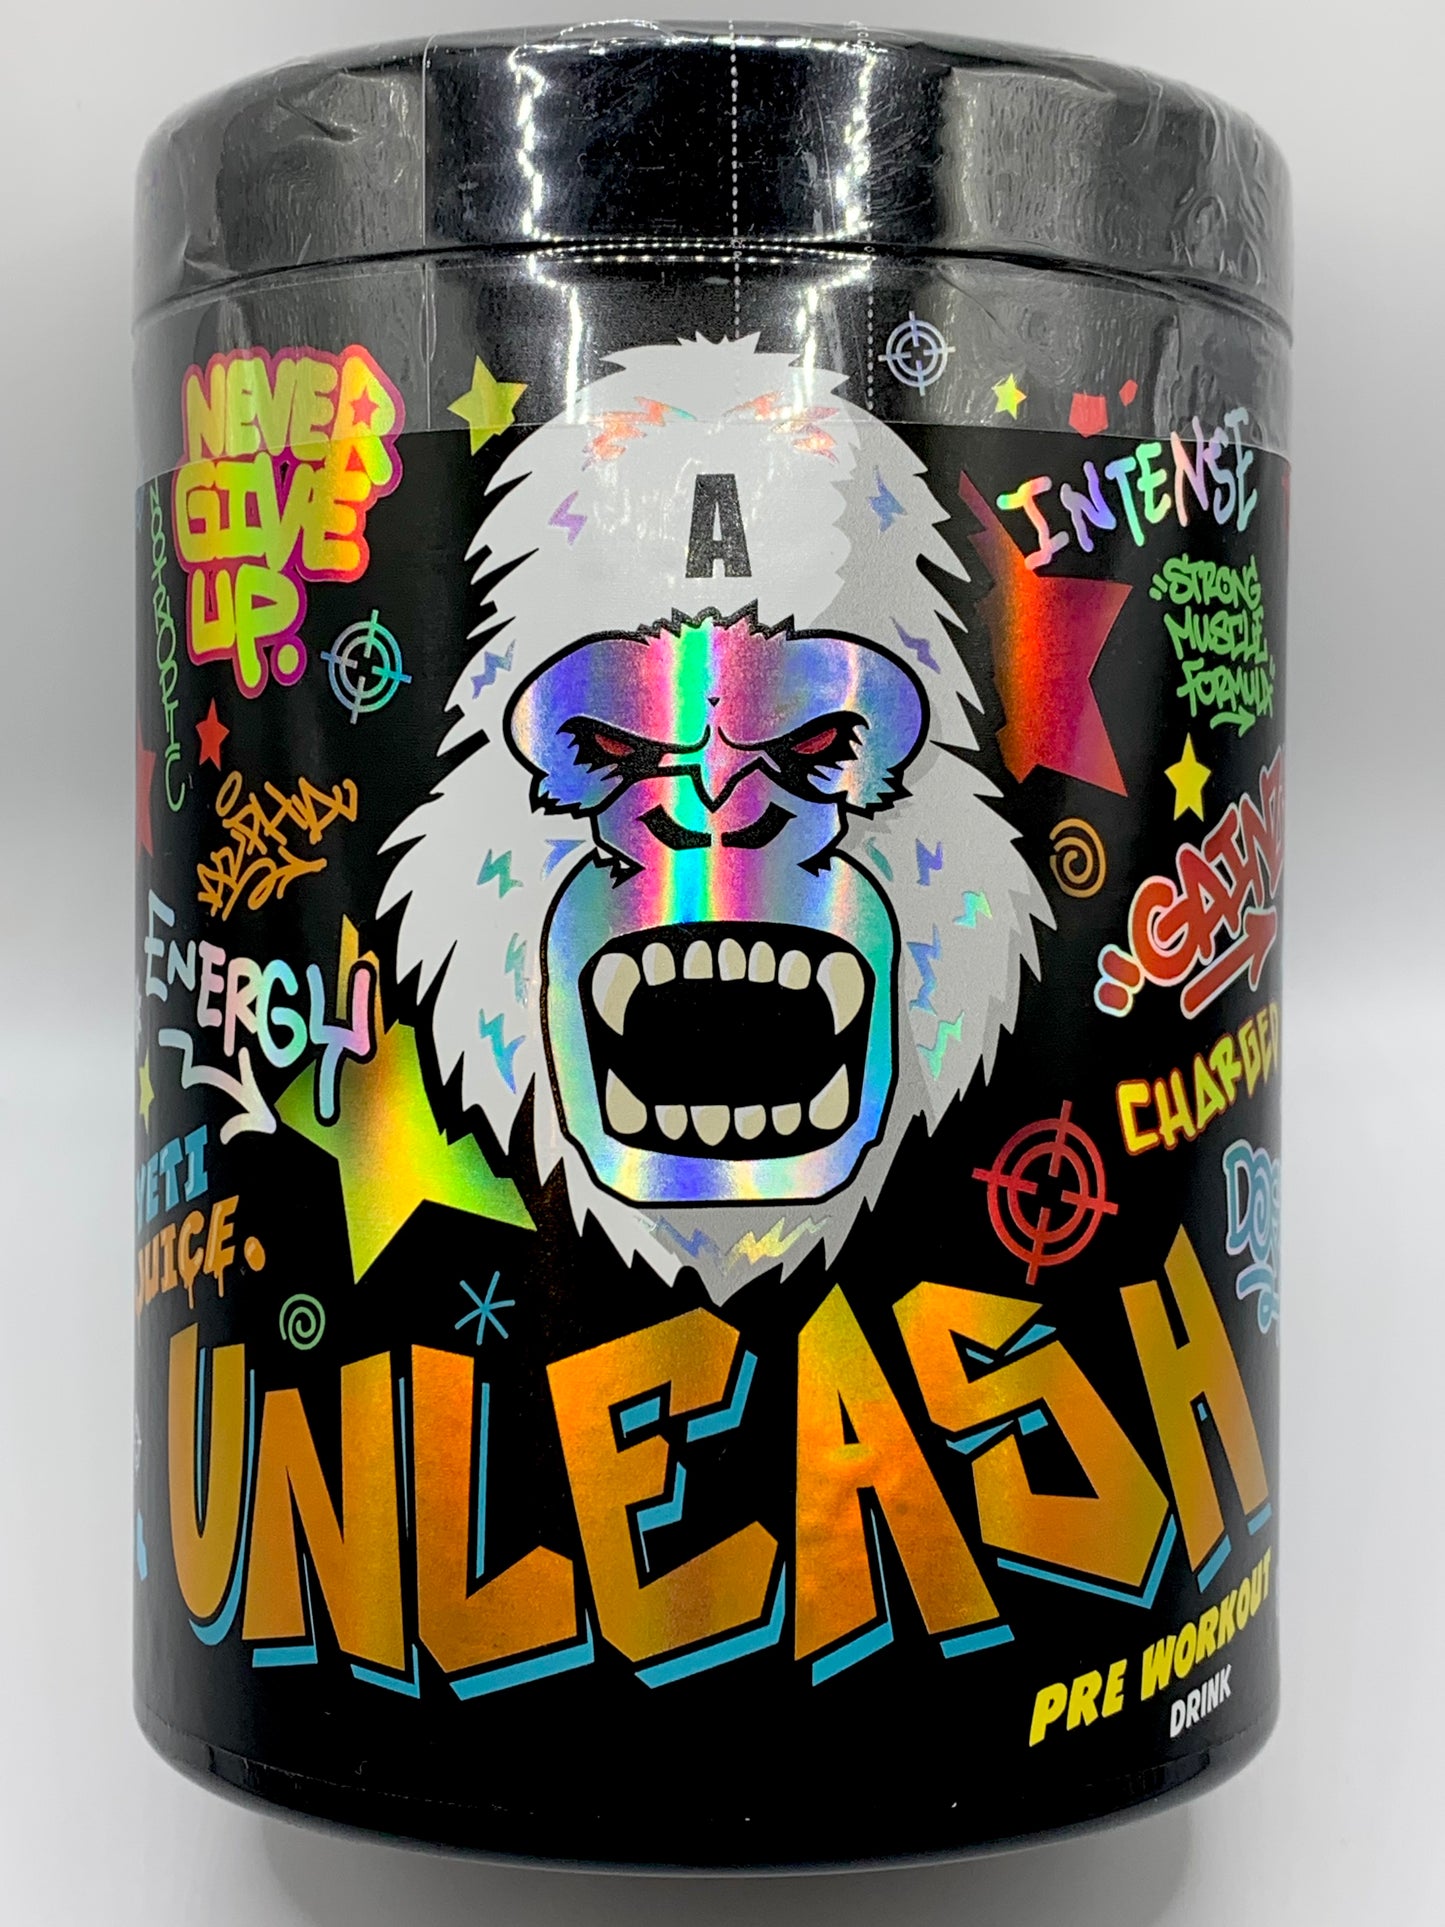 YETI JUICE UNLEASH - SUPER LIMITED ALL IN ONE PRE WORKOUT PRODUCT - SOUR GUMMY BEARS FLAVOUR - 40 SERVINGS